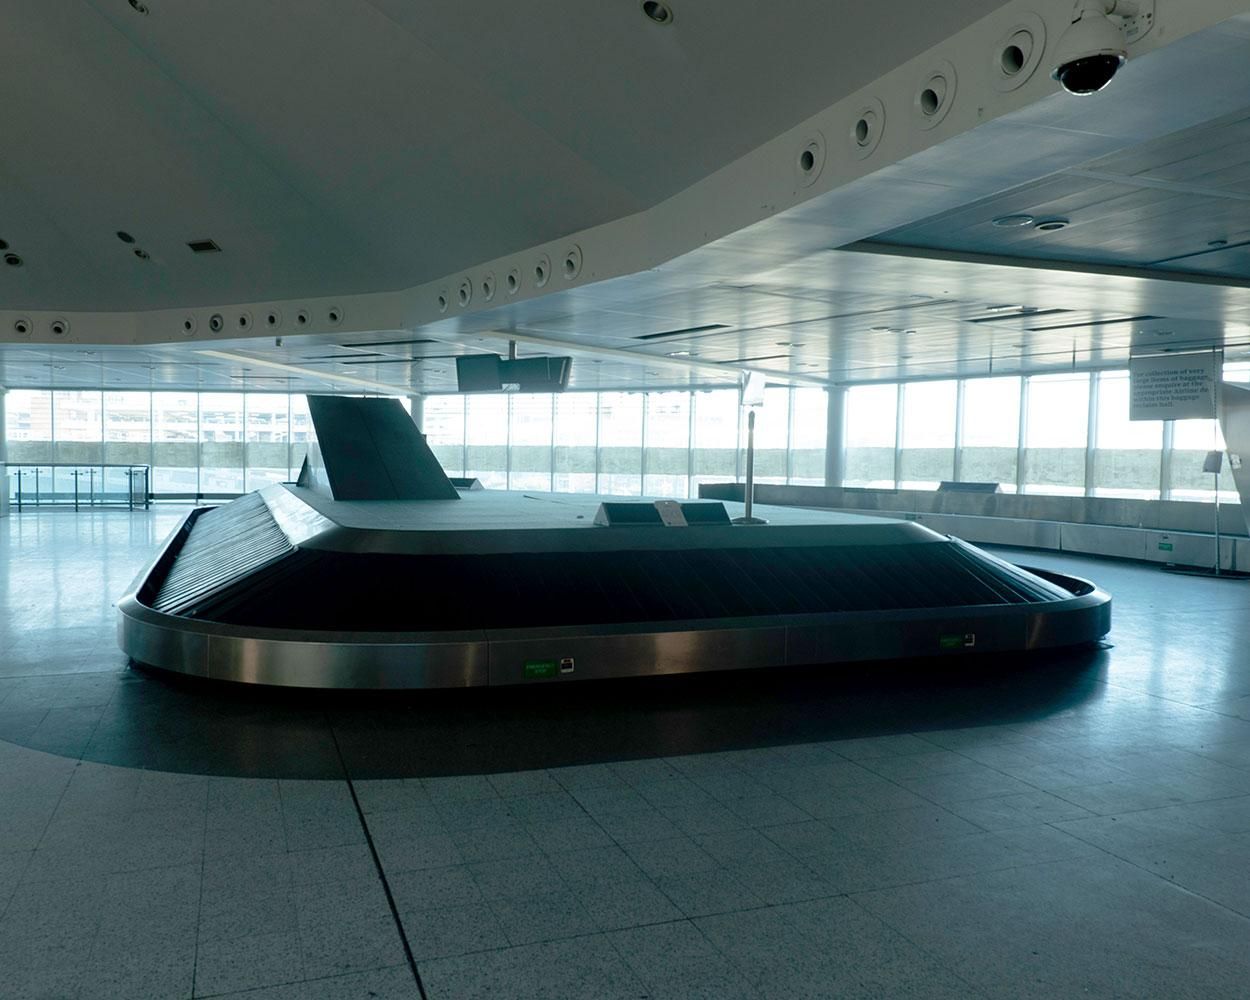 The baggage claim area at London Heathrow Airport Terminal 1.